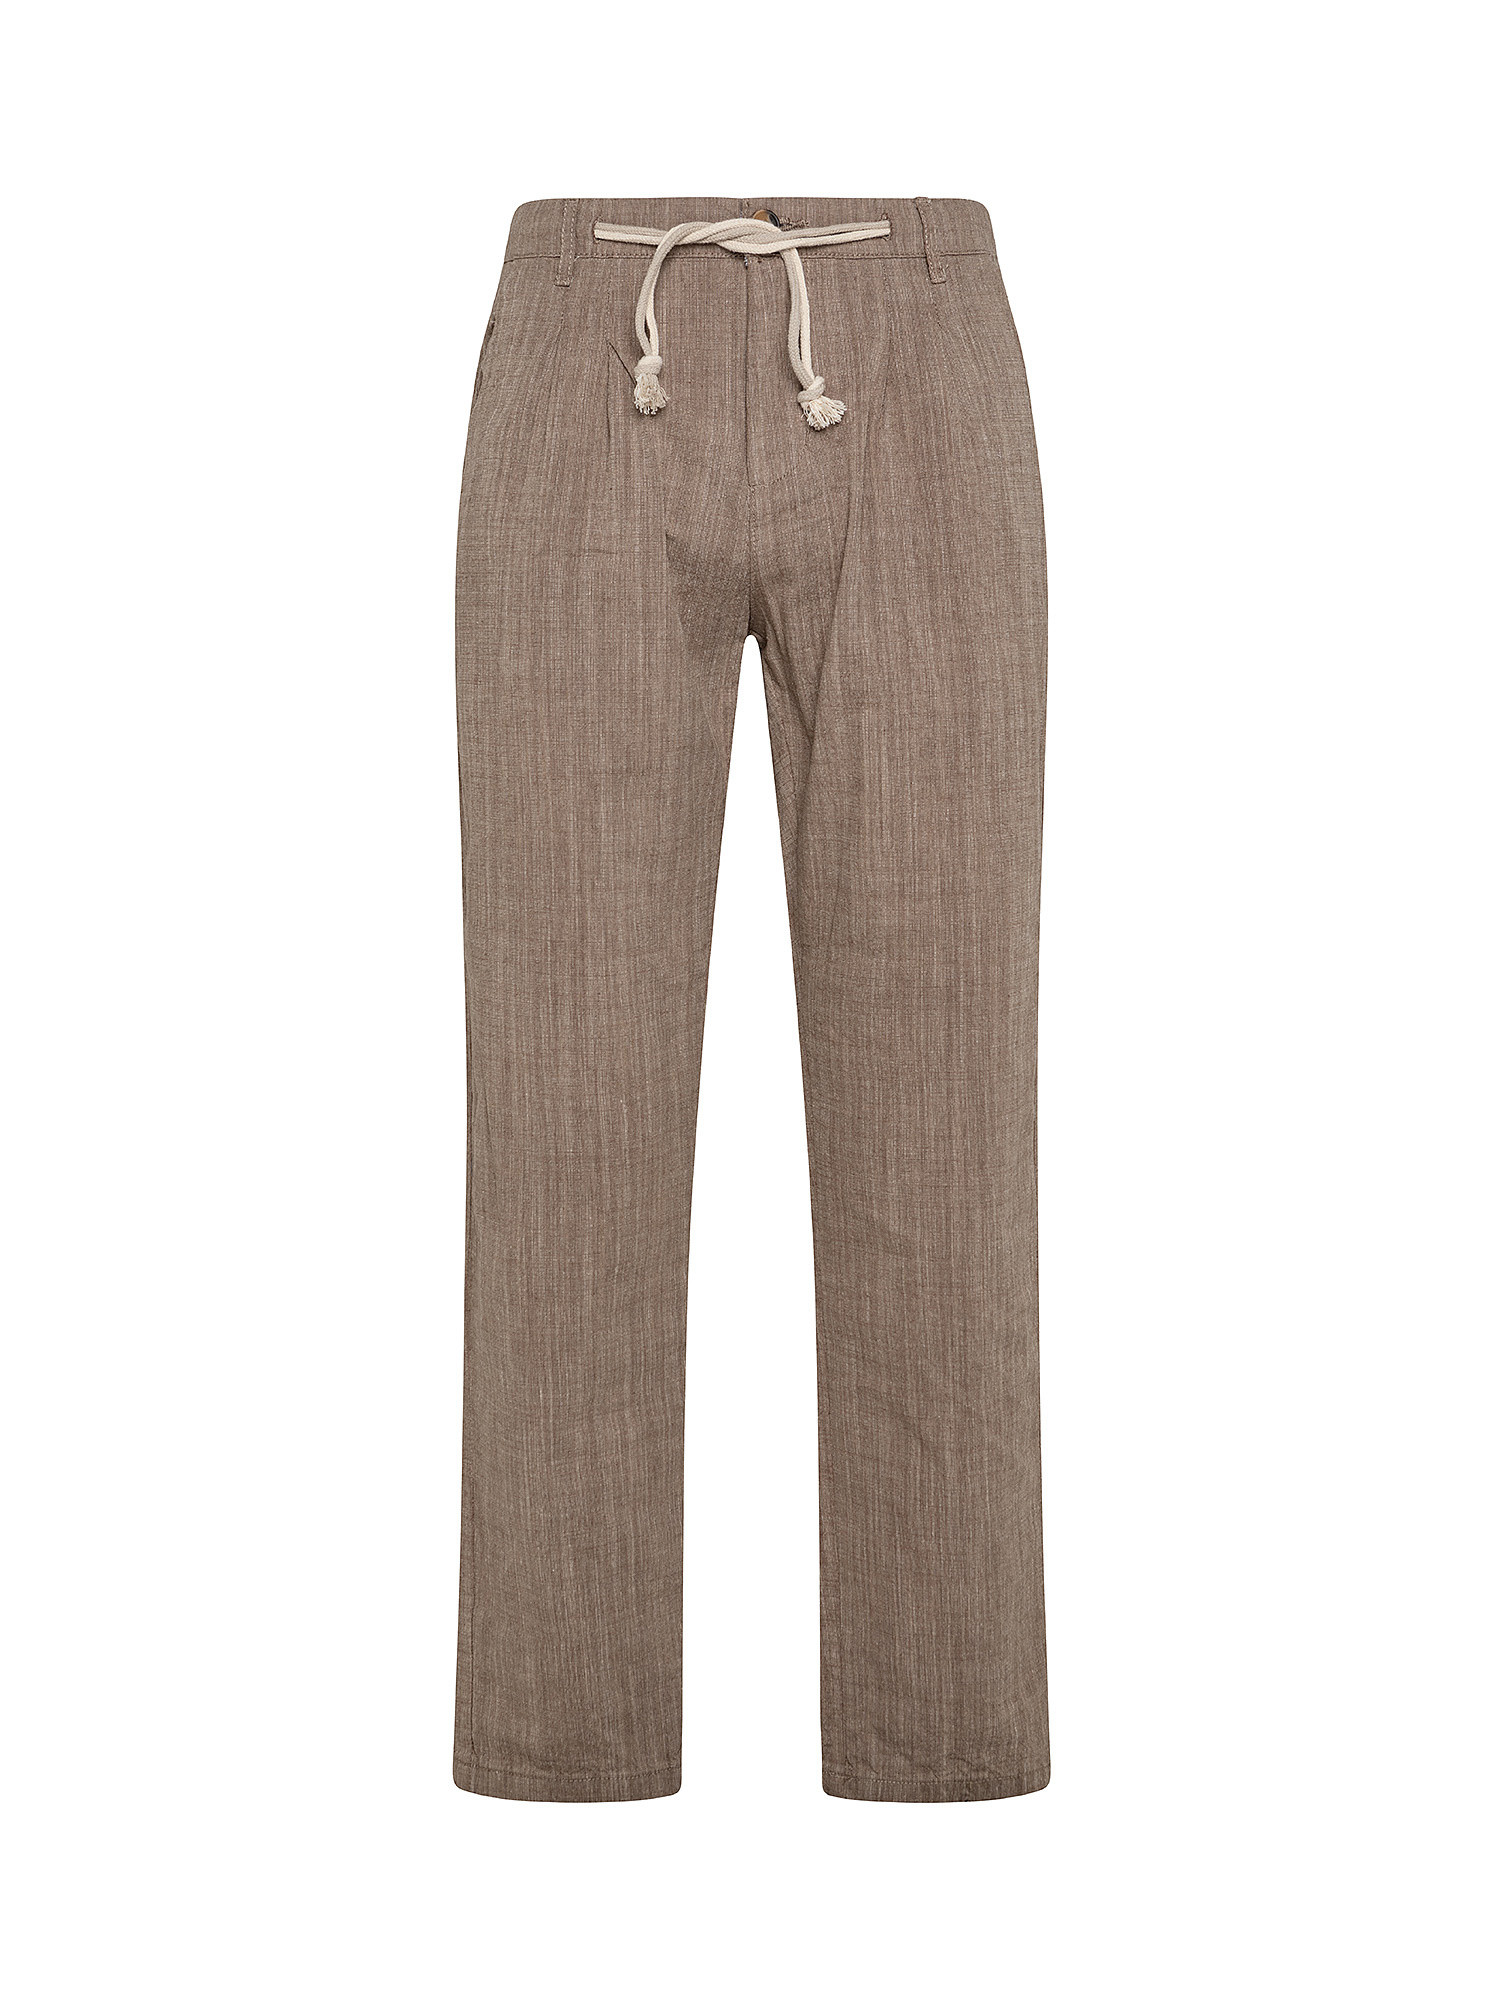 Trousers with drawstring, Beige, large image number 0